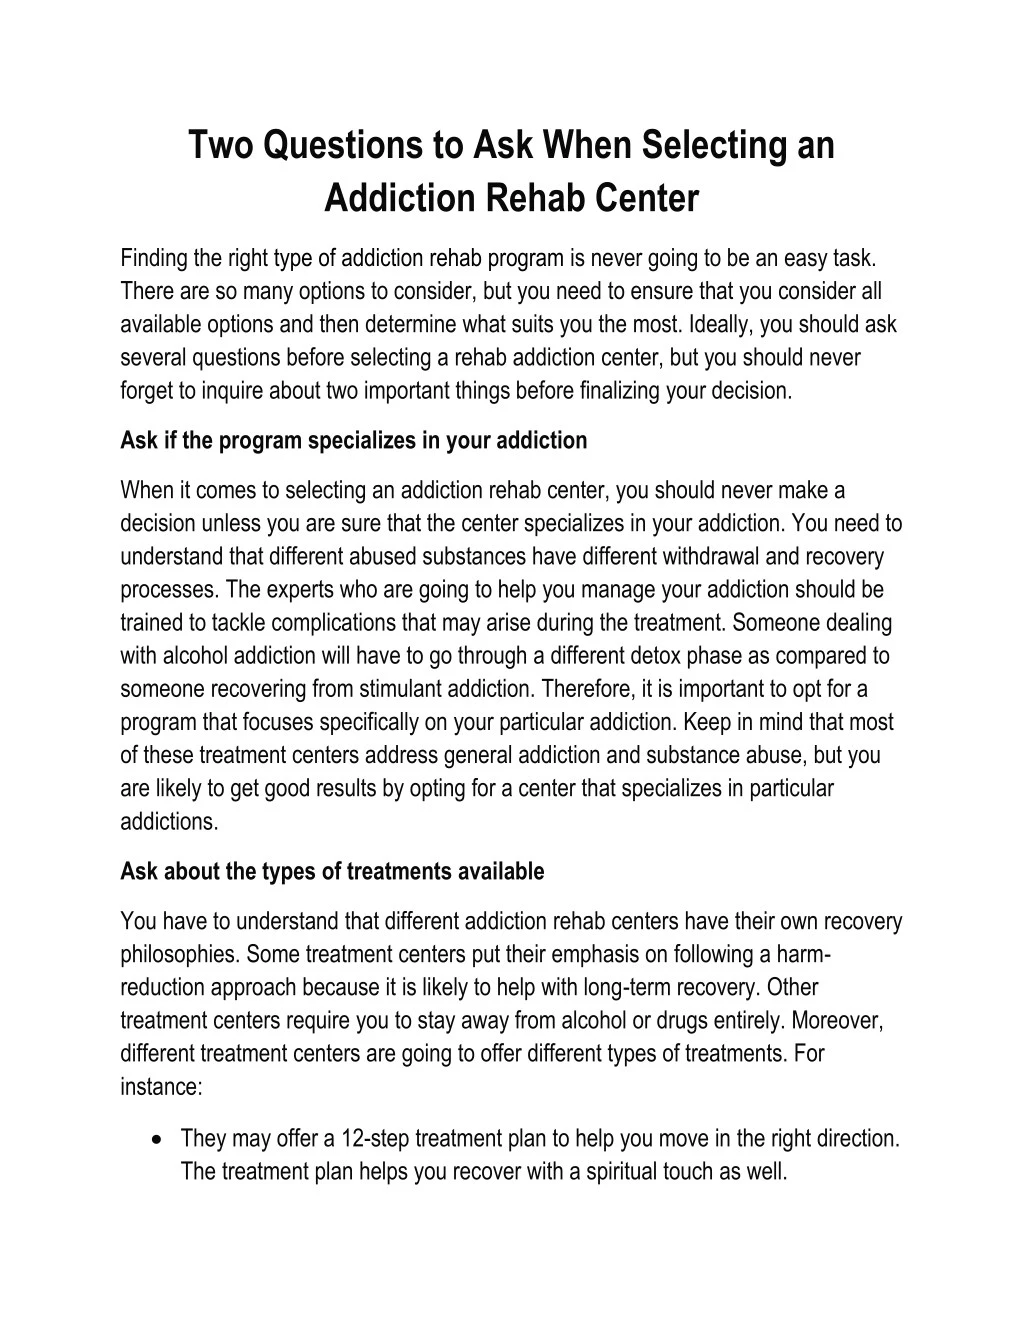 two questions to ask when selecting an addiction